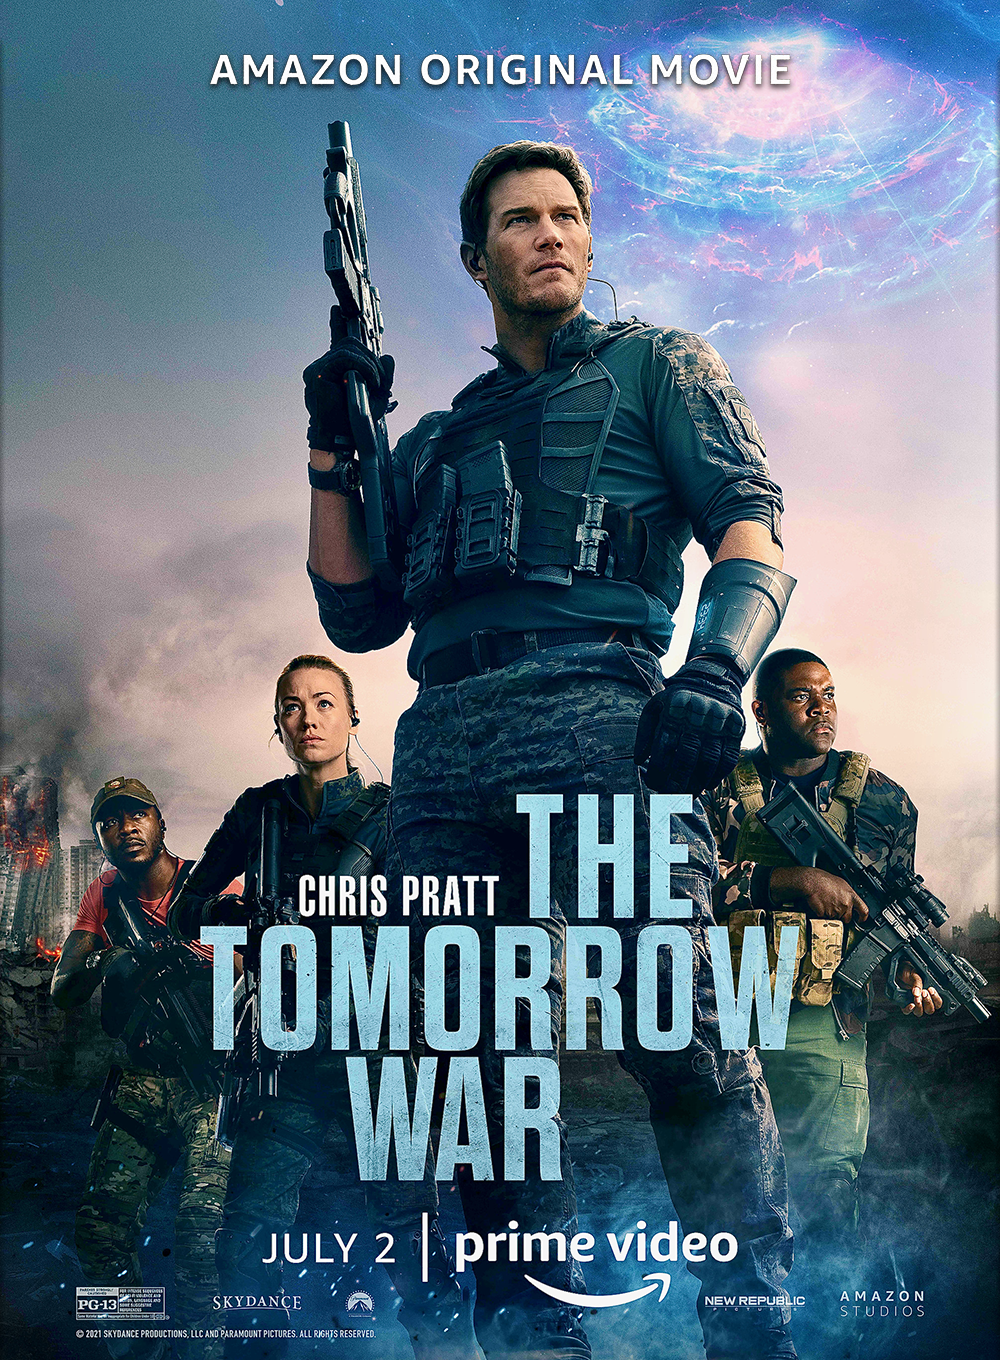 Voir Film The Tomorrow War - Film (2021) streaming VF gratuit complet